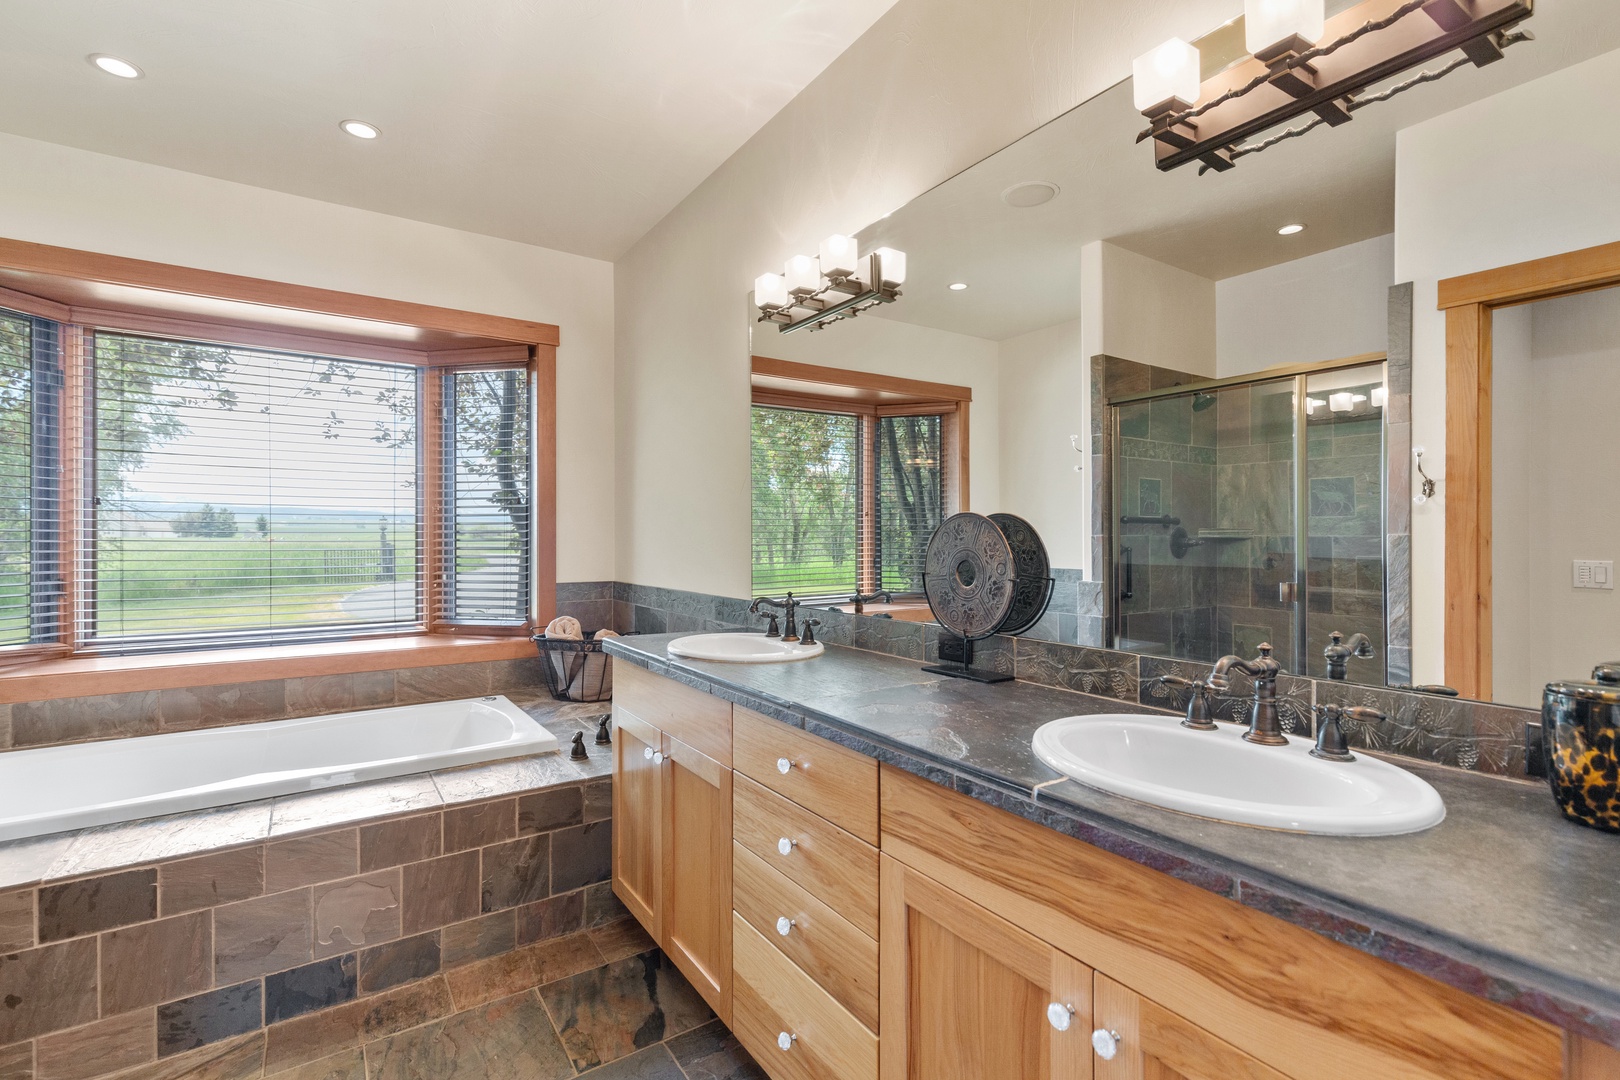 Bozeman Vacation Rentals, The Woodland Oasis - Ensuite bathroom with jacuzzi tub